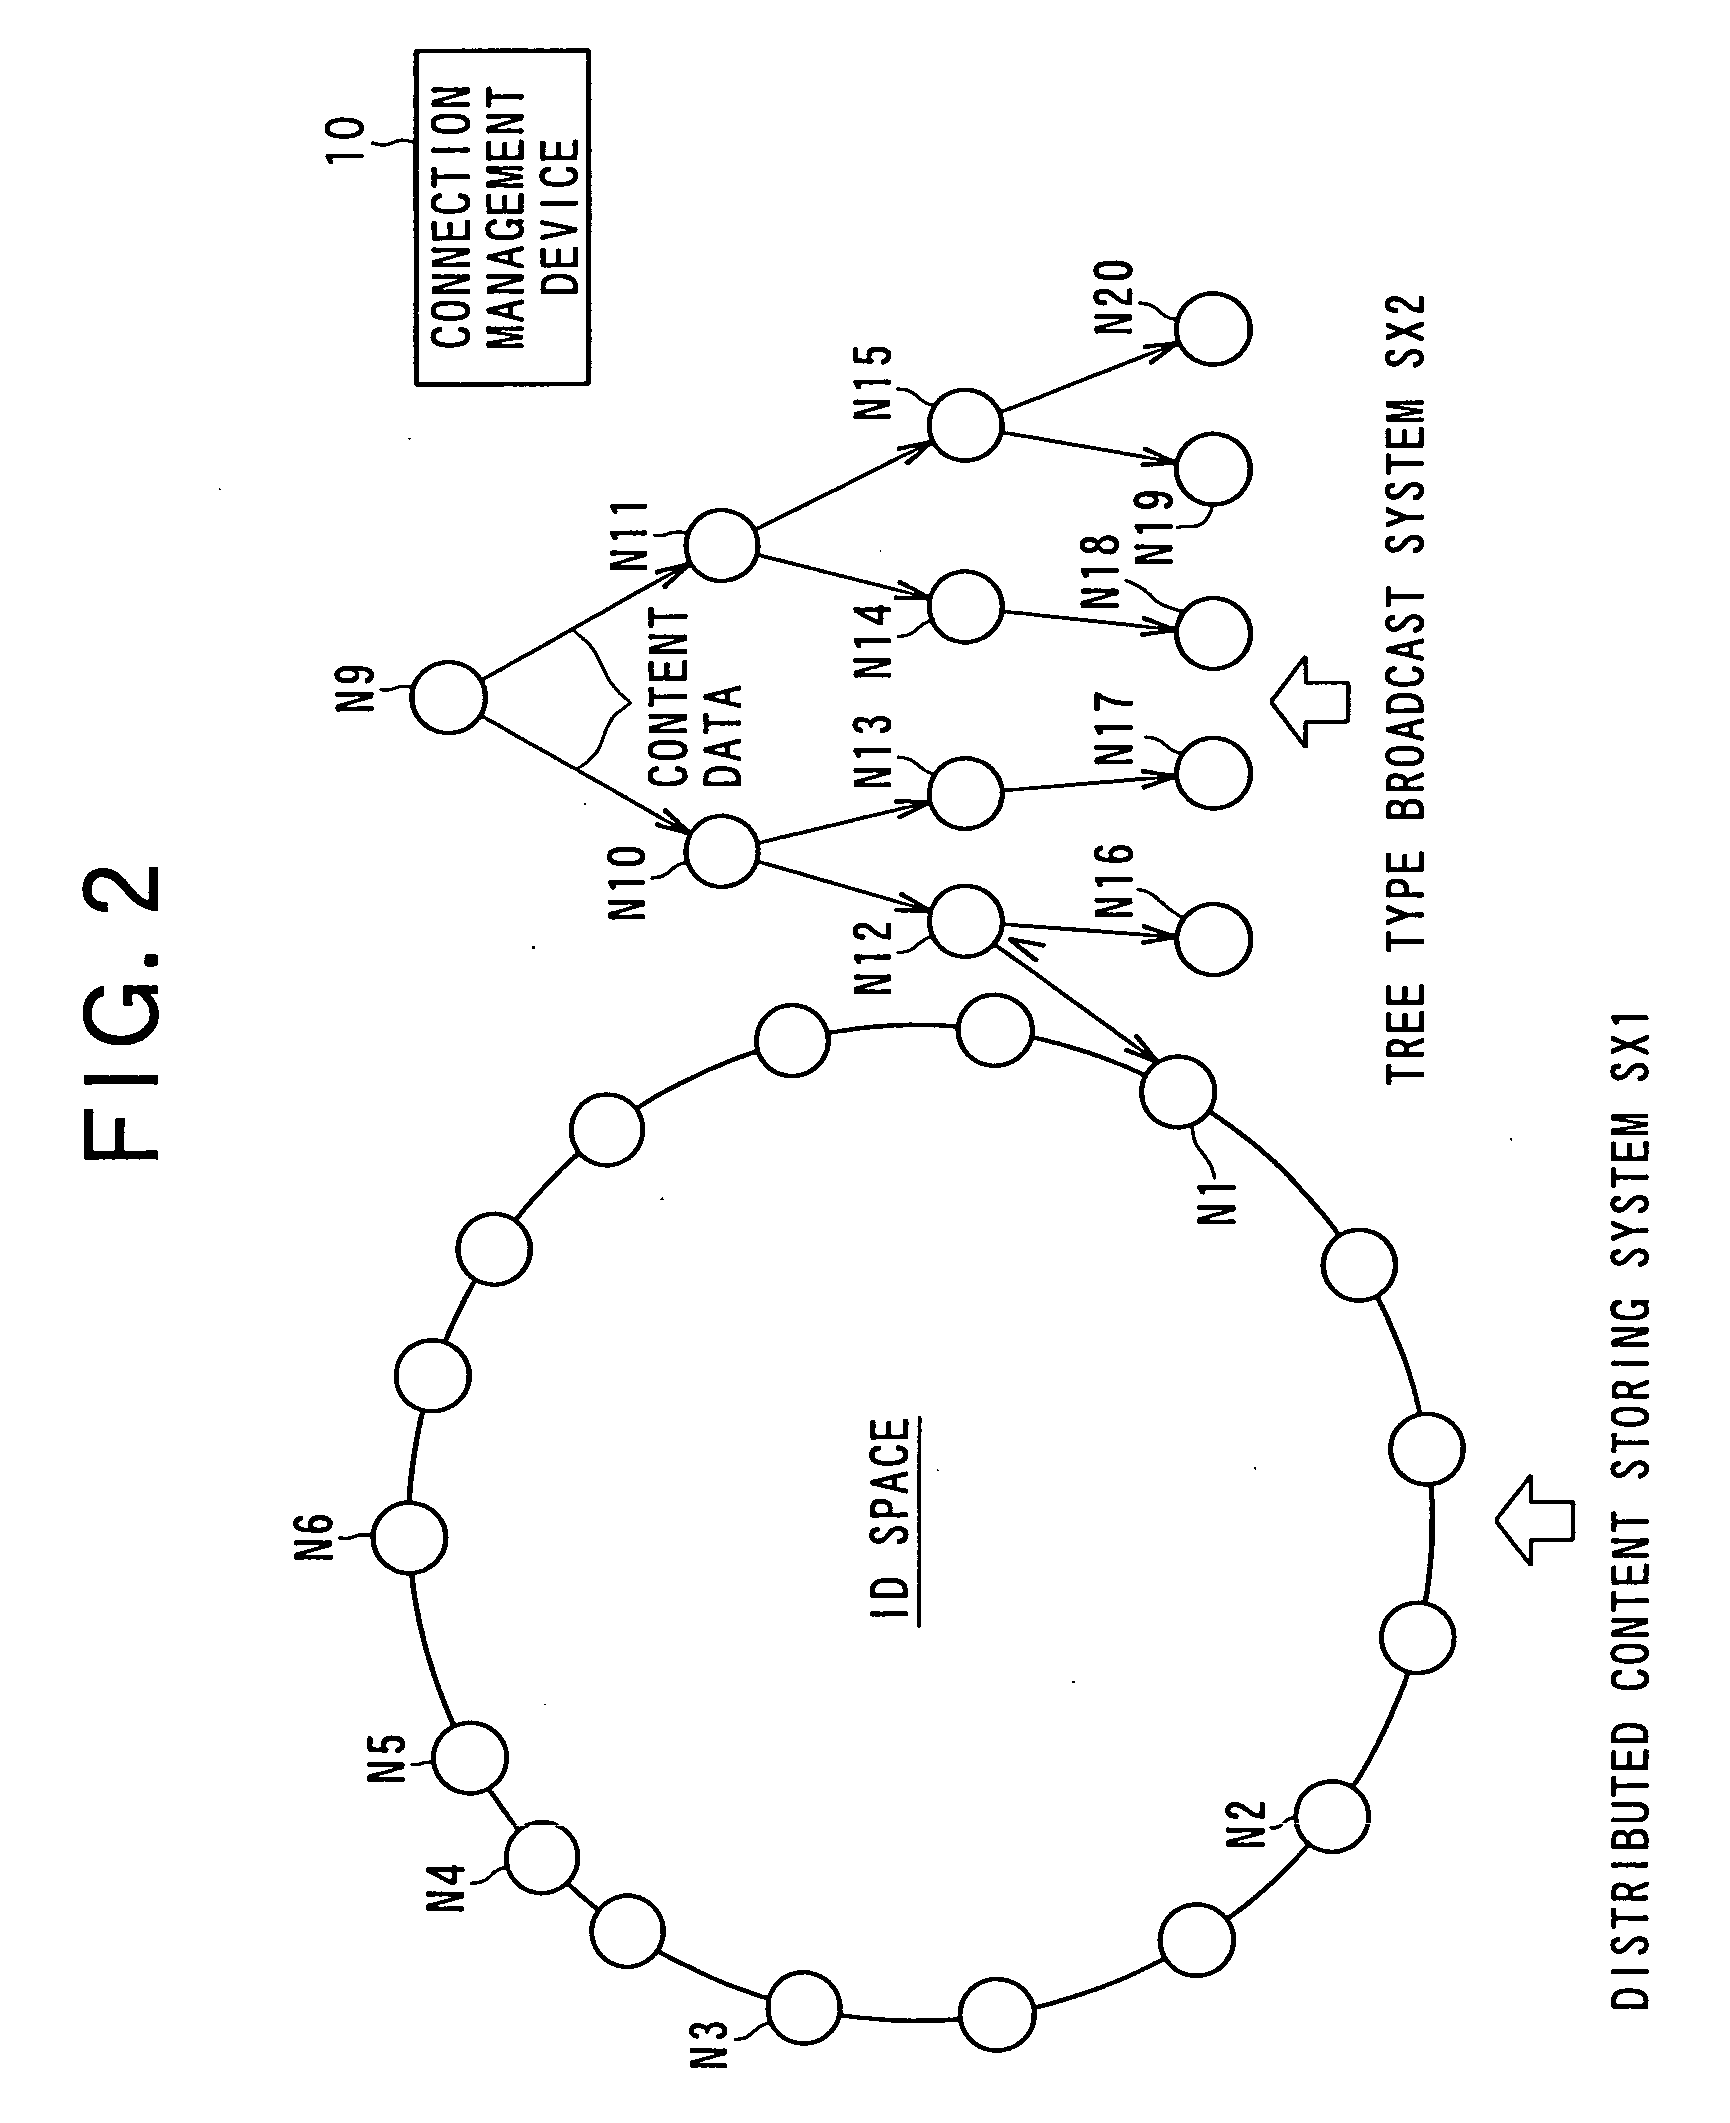 Tree type broadcast system, connection target determination method, connection management device, connection management process program, and the like